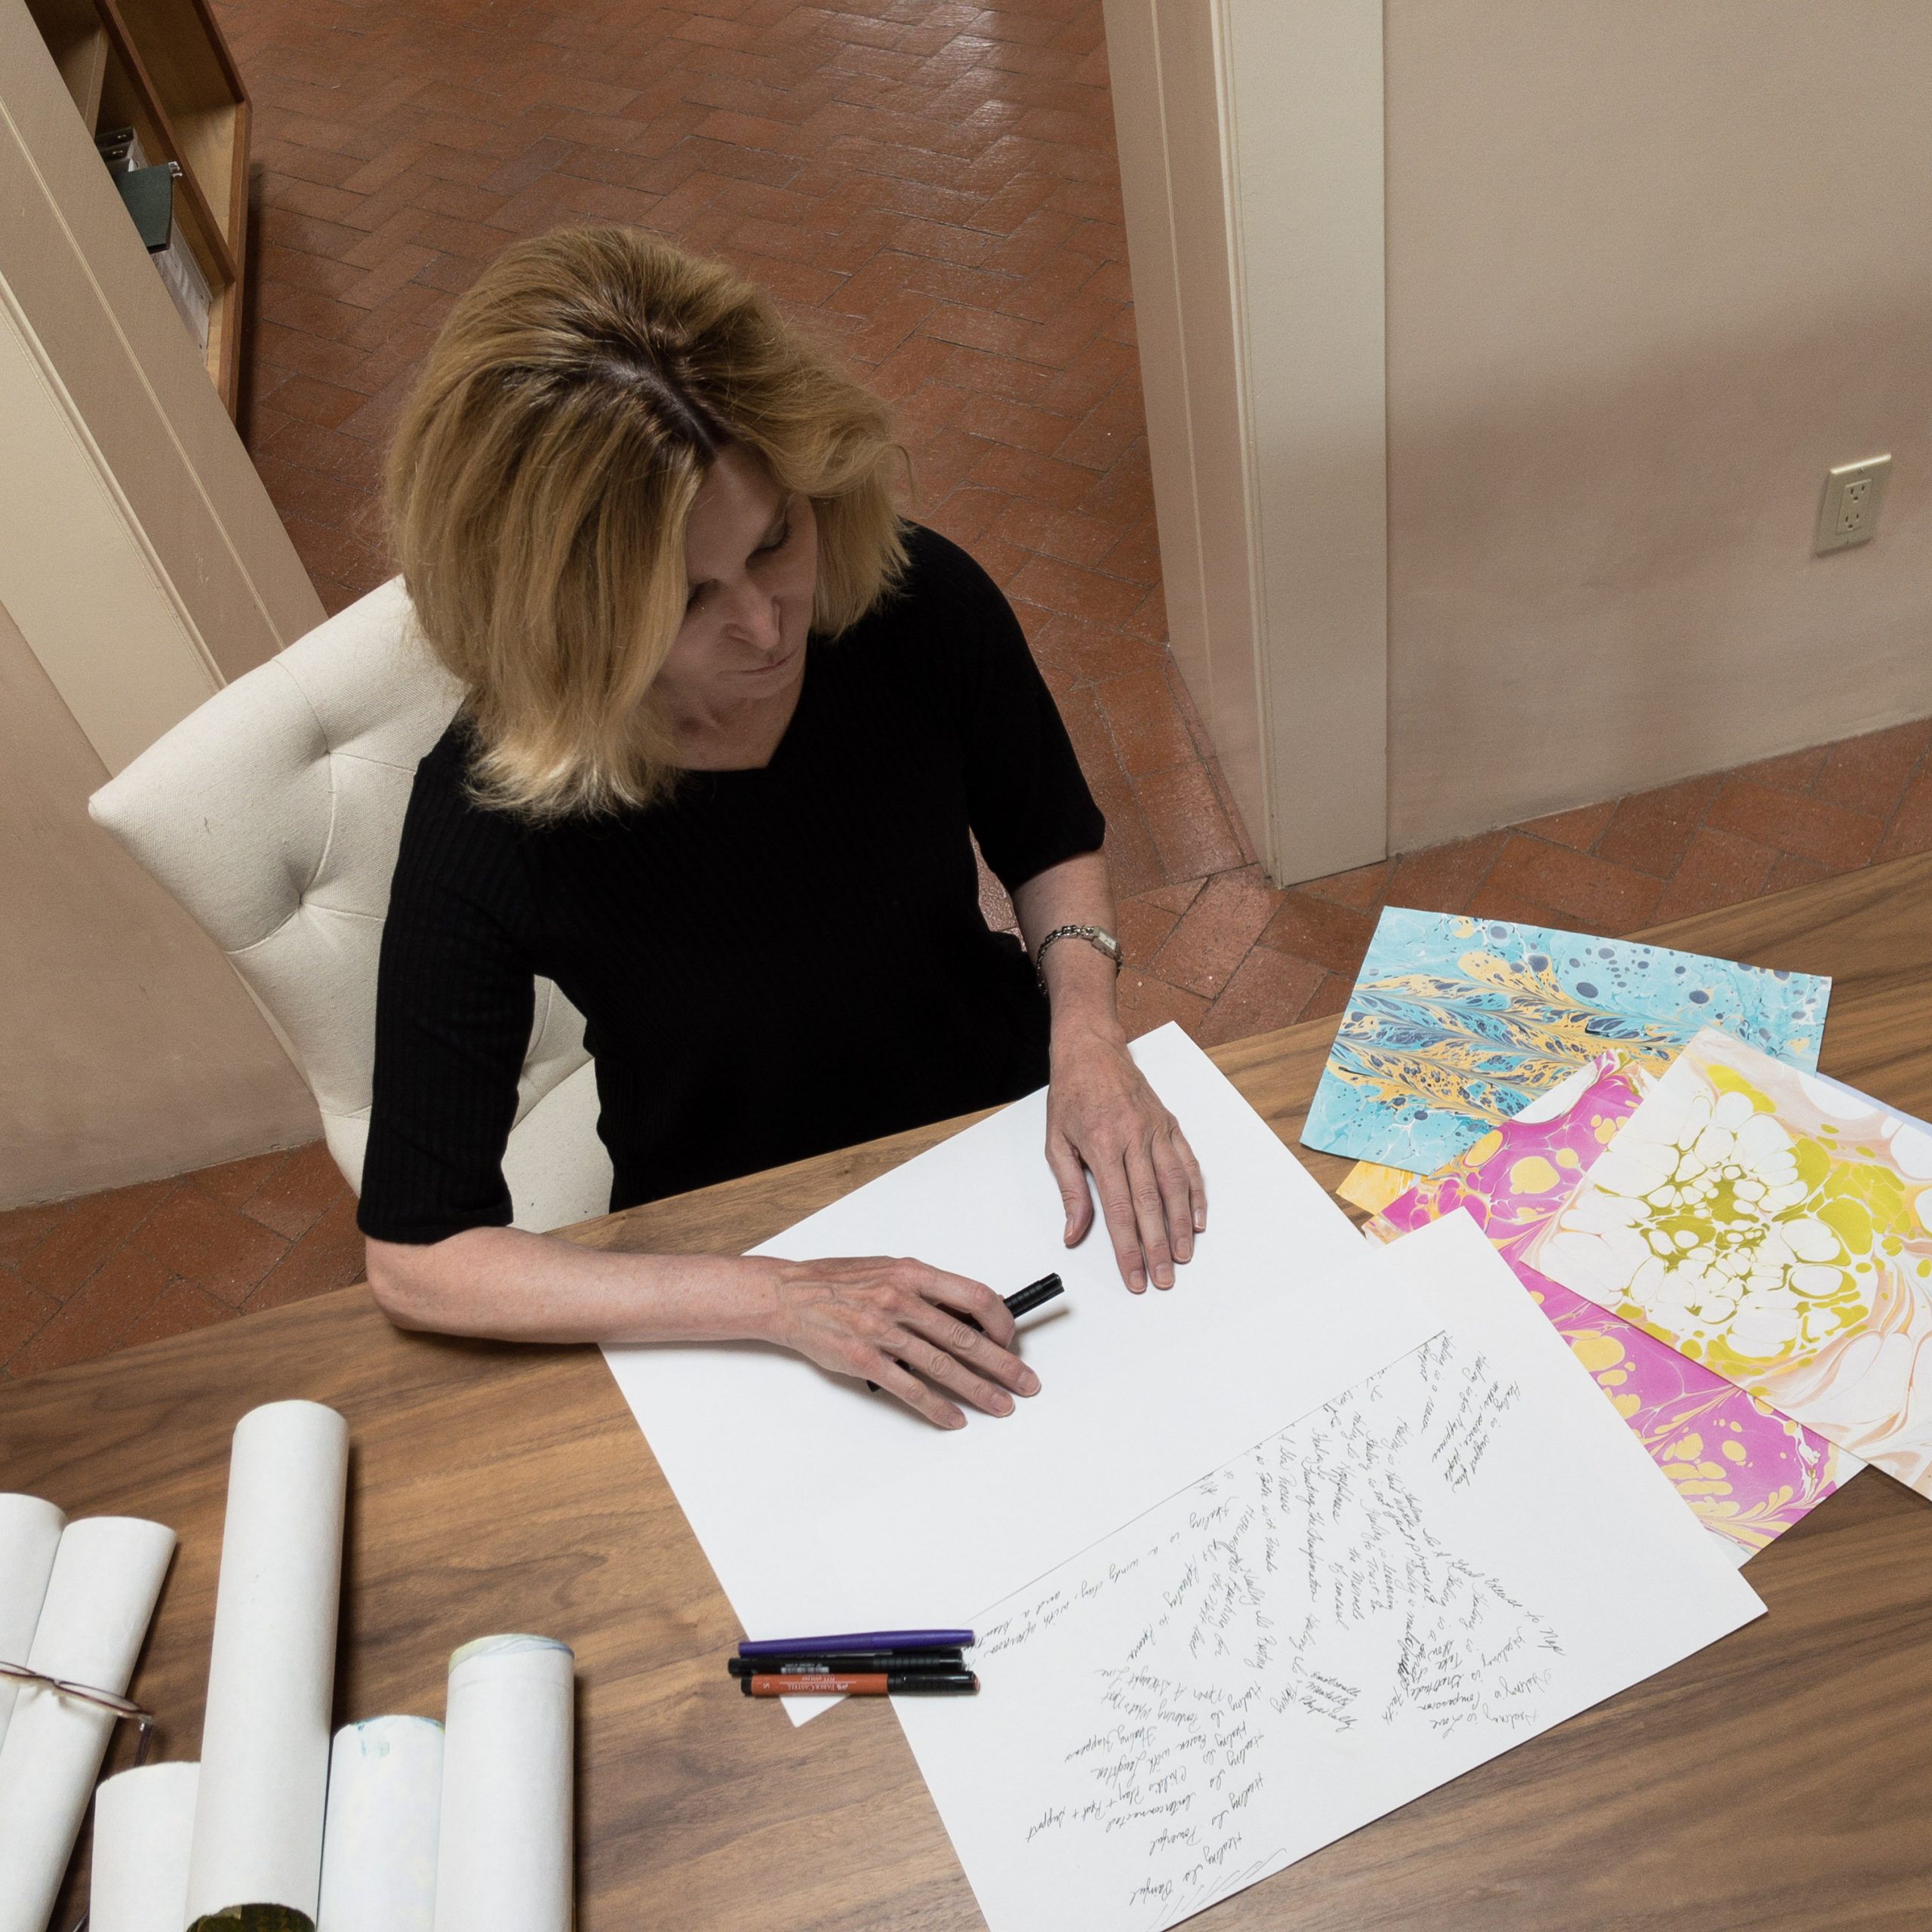 Patricia Varga sitting at a table with artwork and a blank sheet of paper